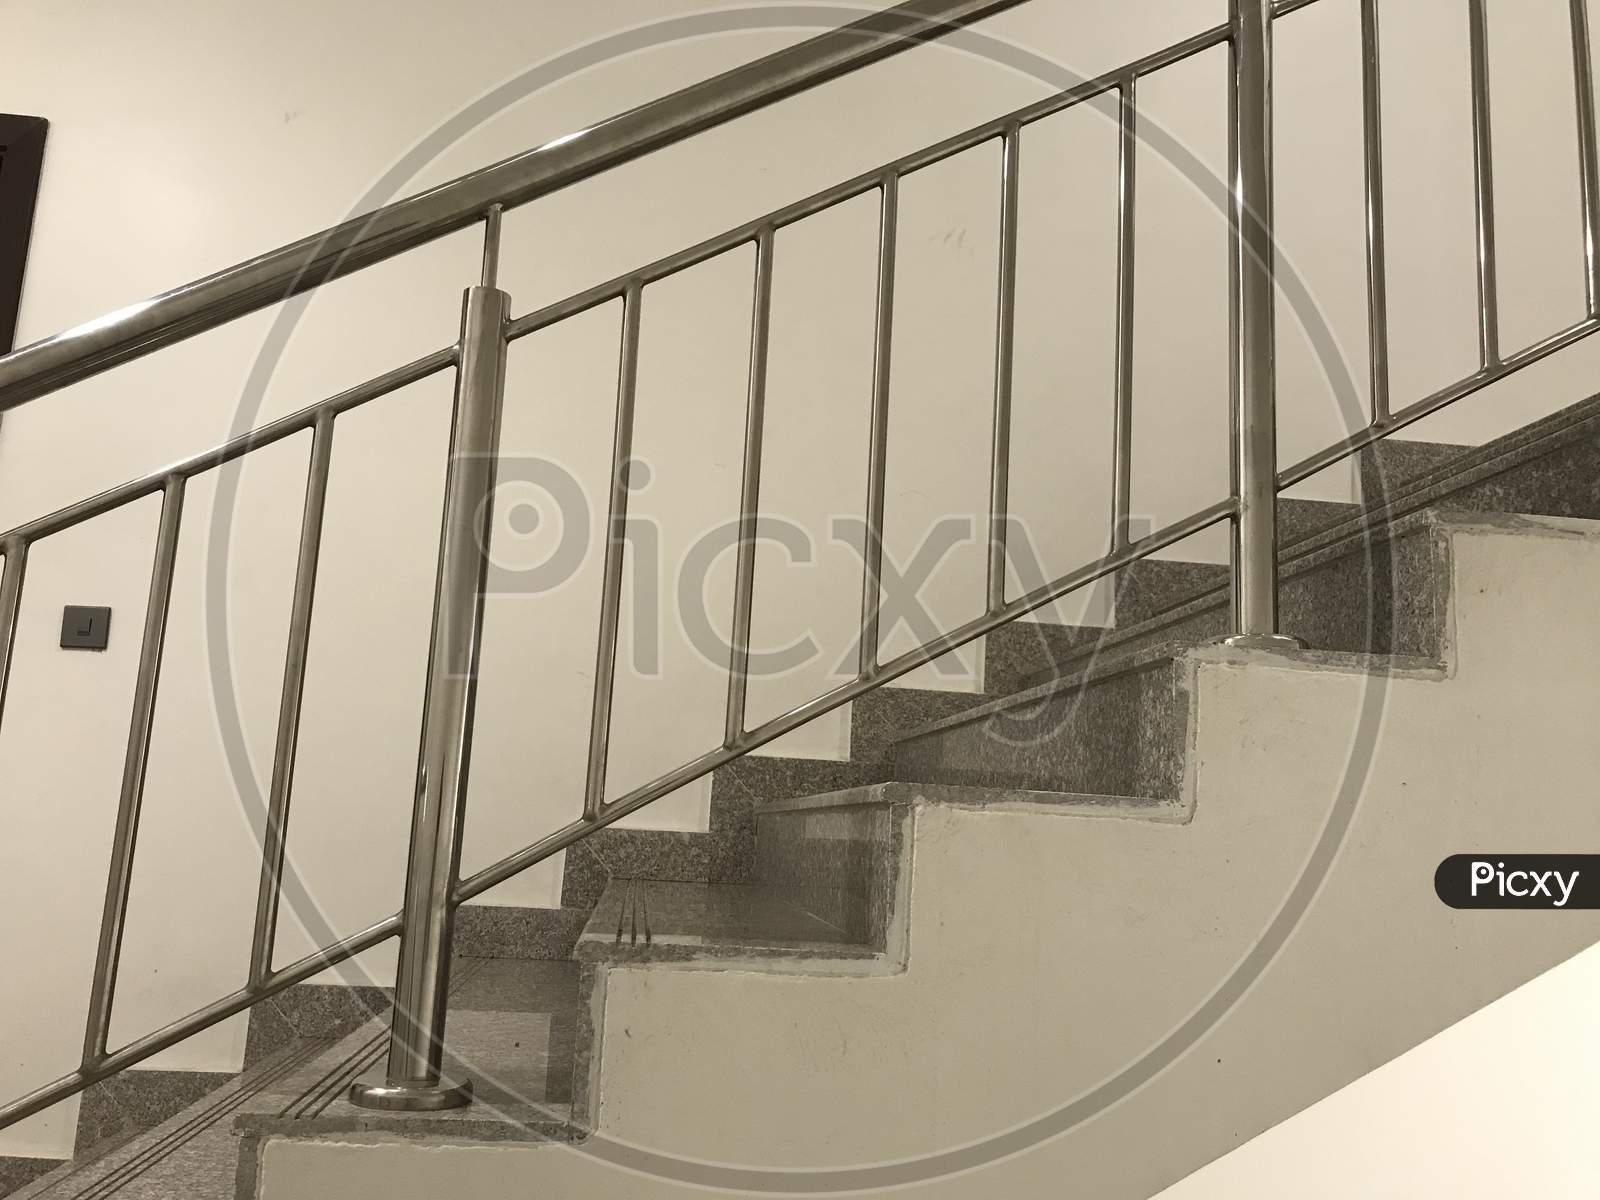 Fire Emergency Staircase Single Flight Images Which Includes Waist Concrete Slab Tread Riser Finished By Granite And Stainless Steel Hand Rail In Slope